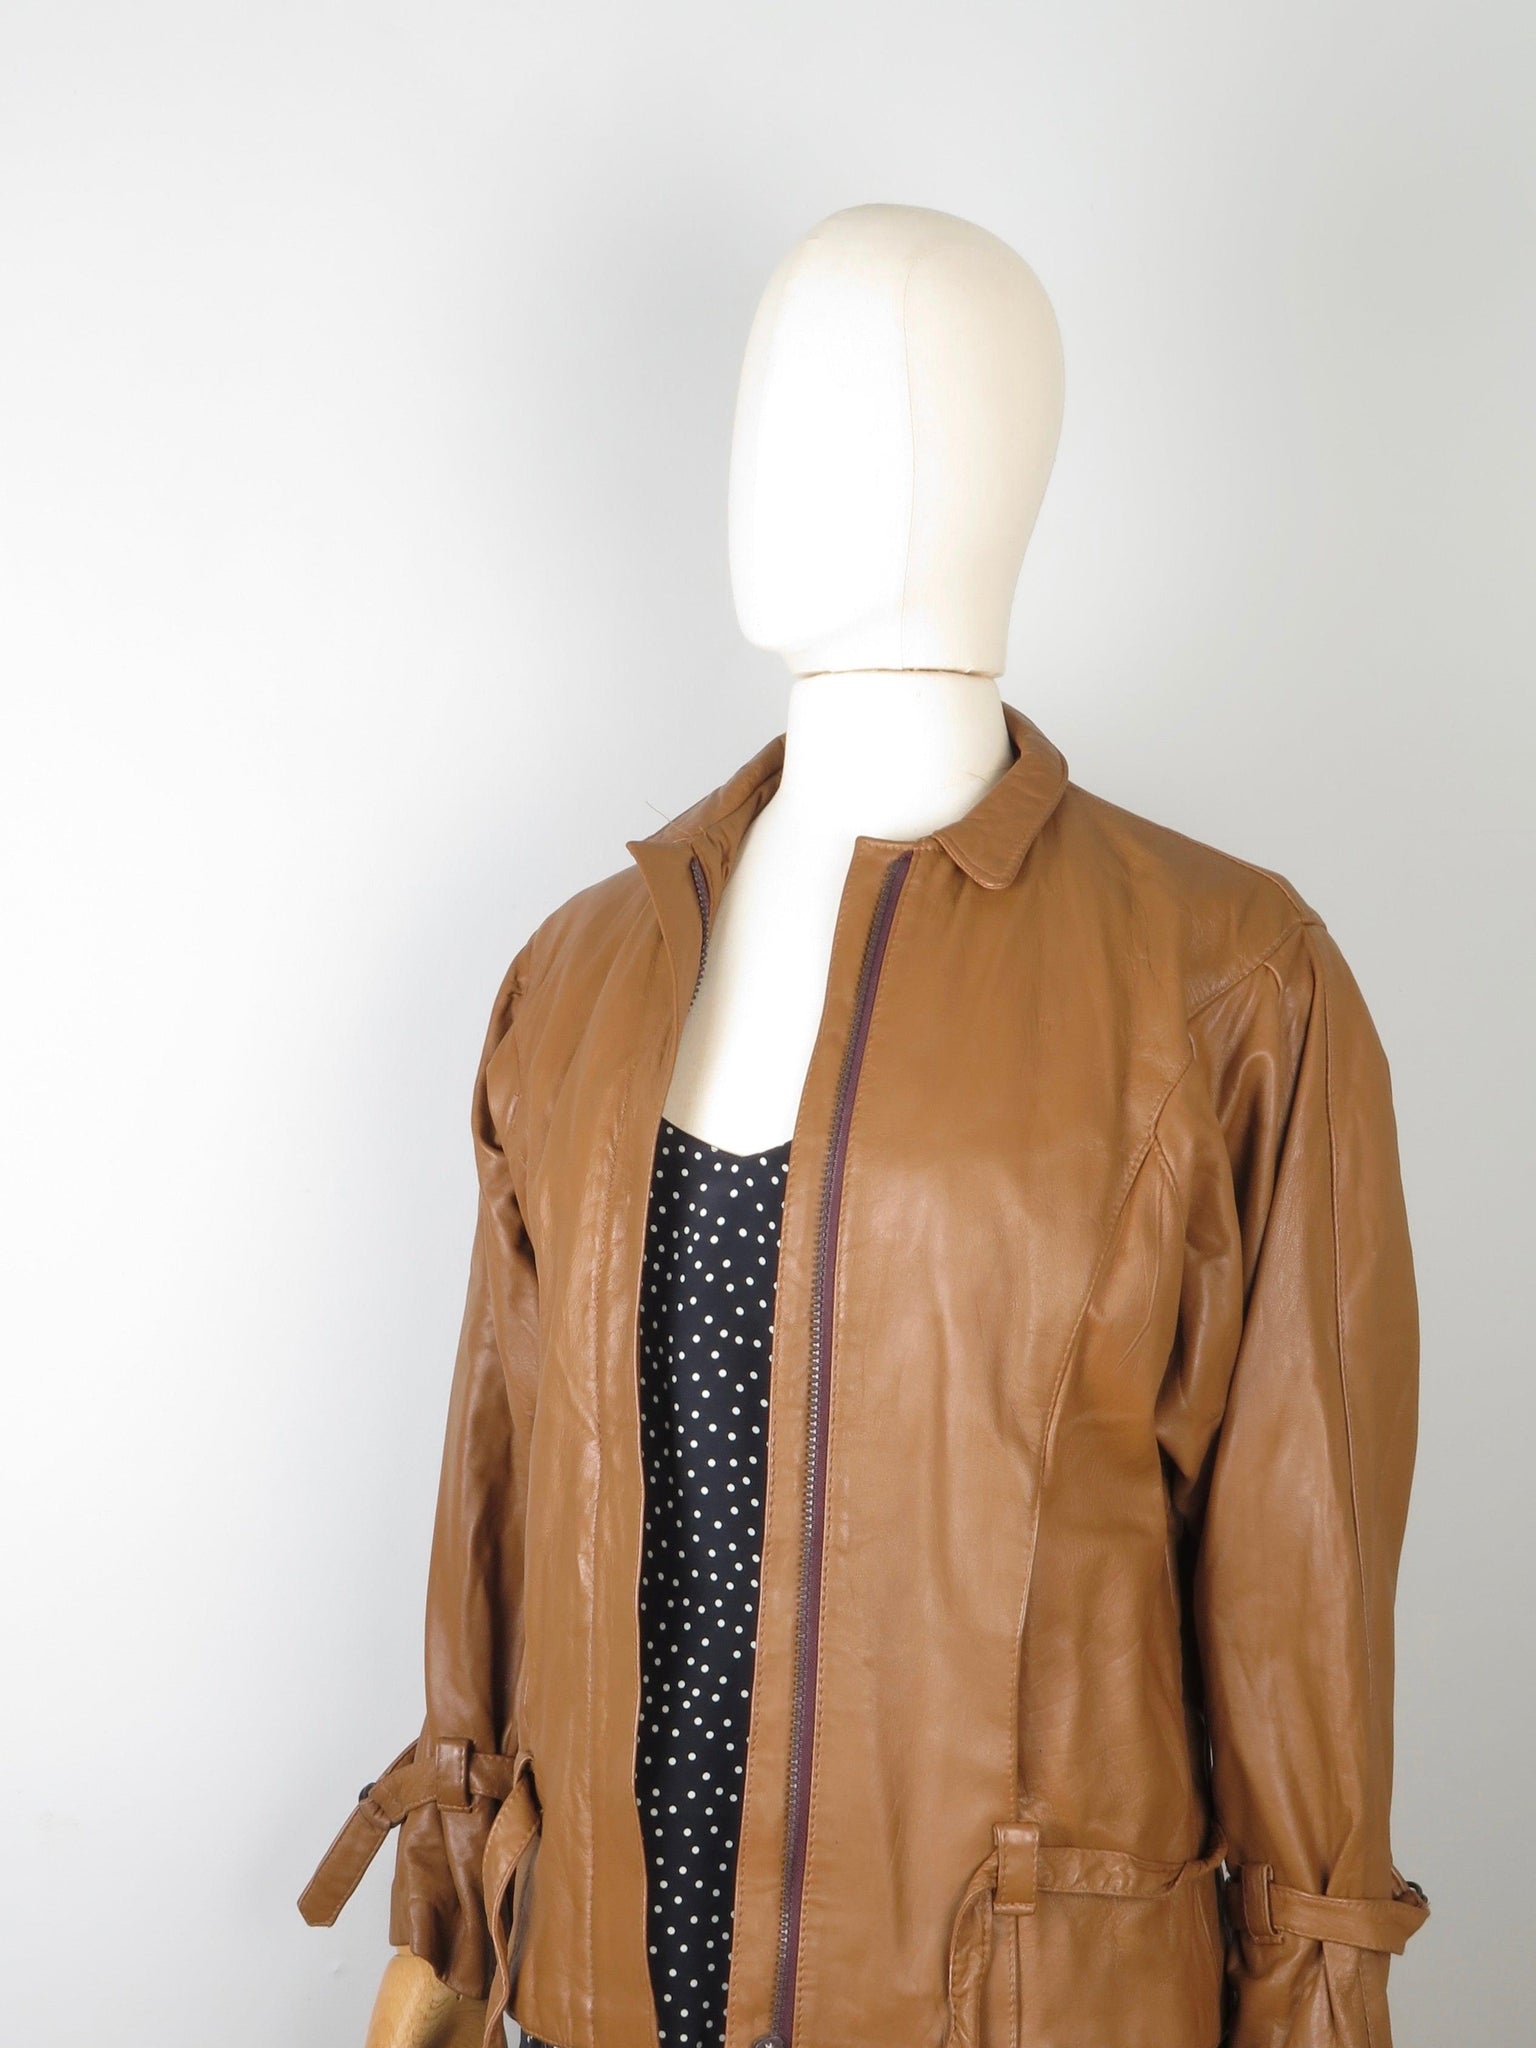 Women's Tan Leather Cropped Bomber Jacket S - The Harlequin